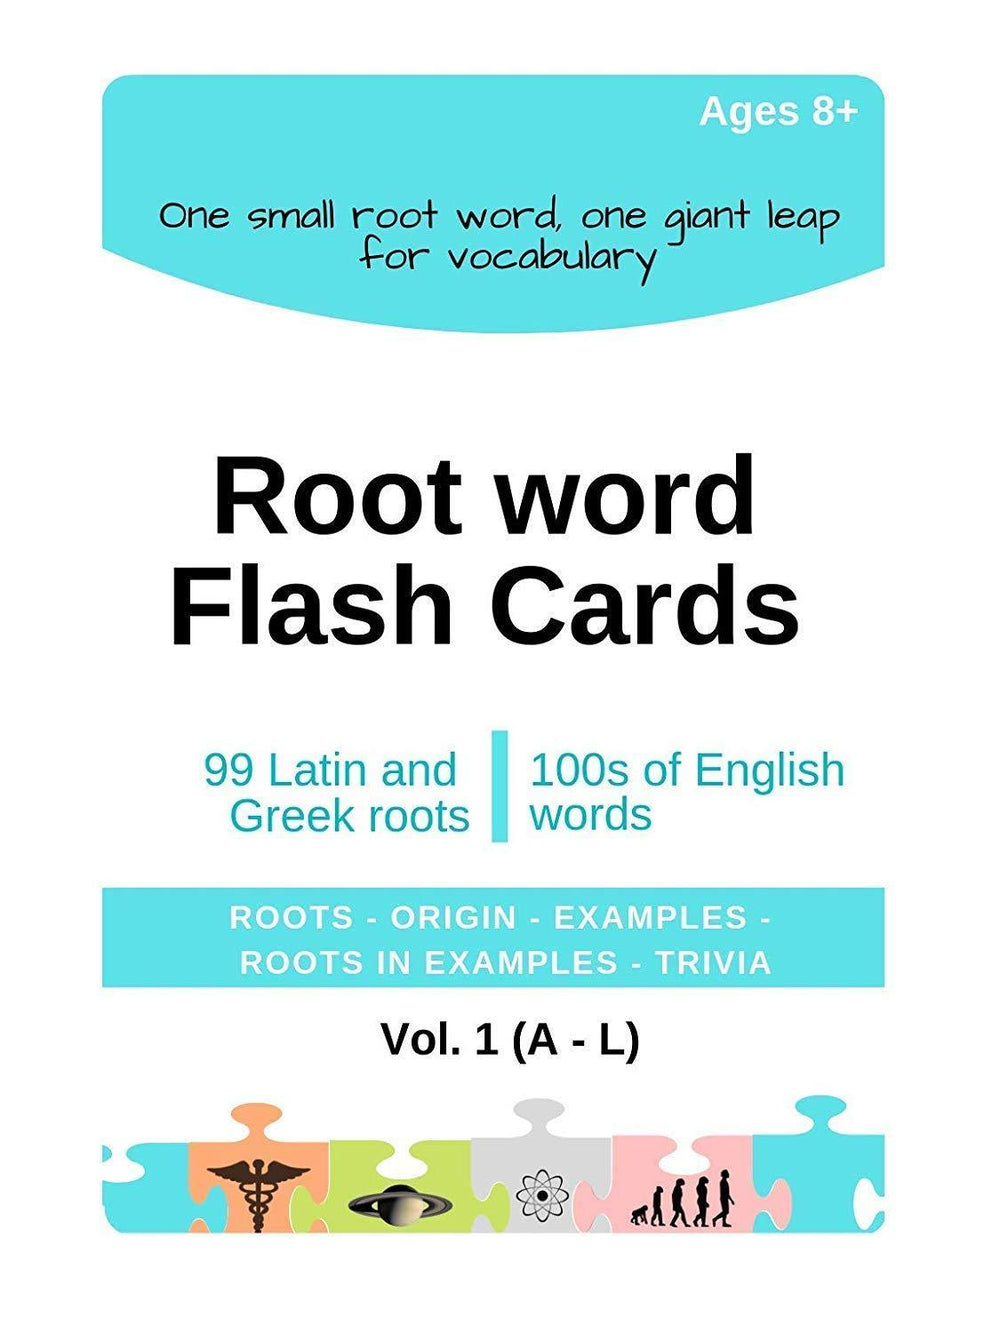 Lilliput Latin and Greek Root Words Based English Vocabulary Builder Flash Cards Vol 1: (A-L) - BOSTON CREATIVE COMPANY